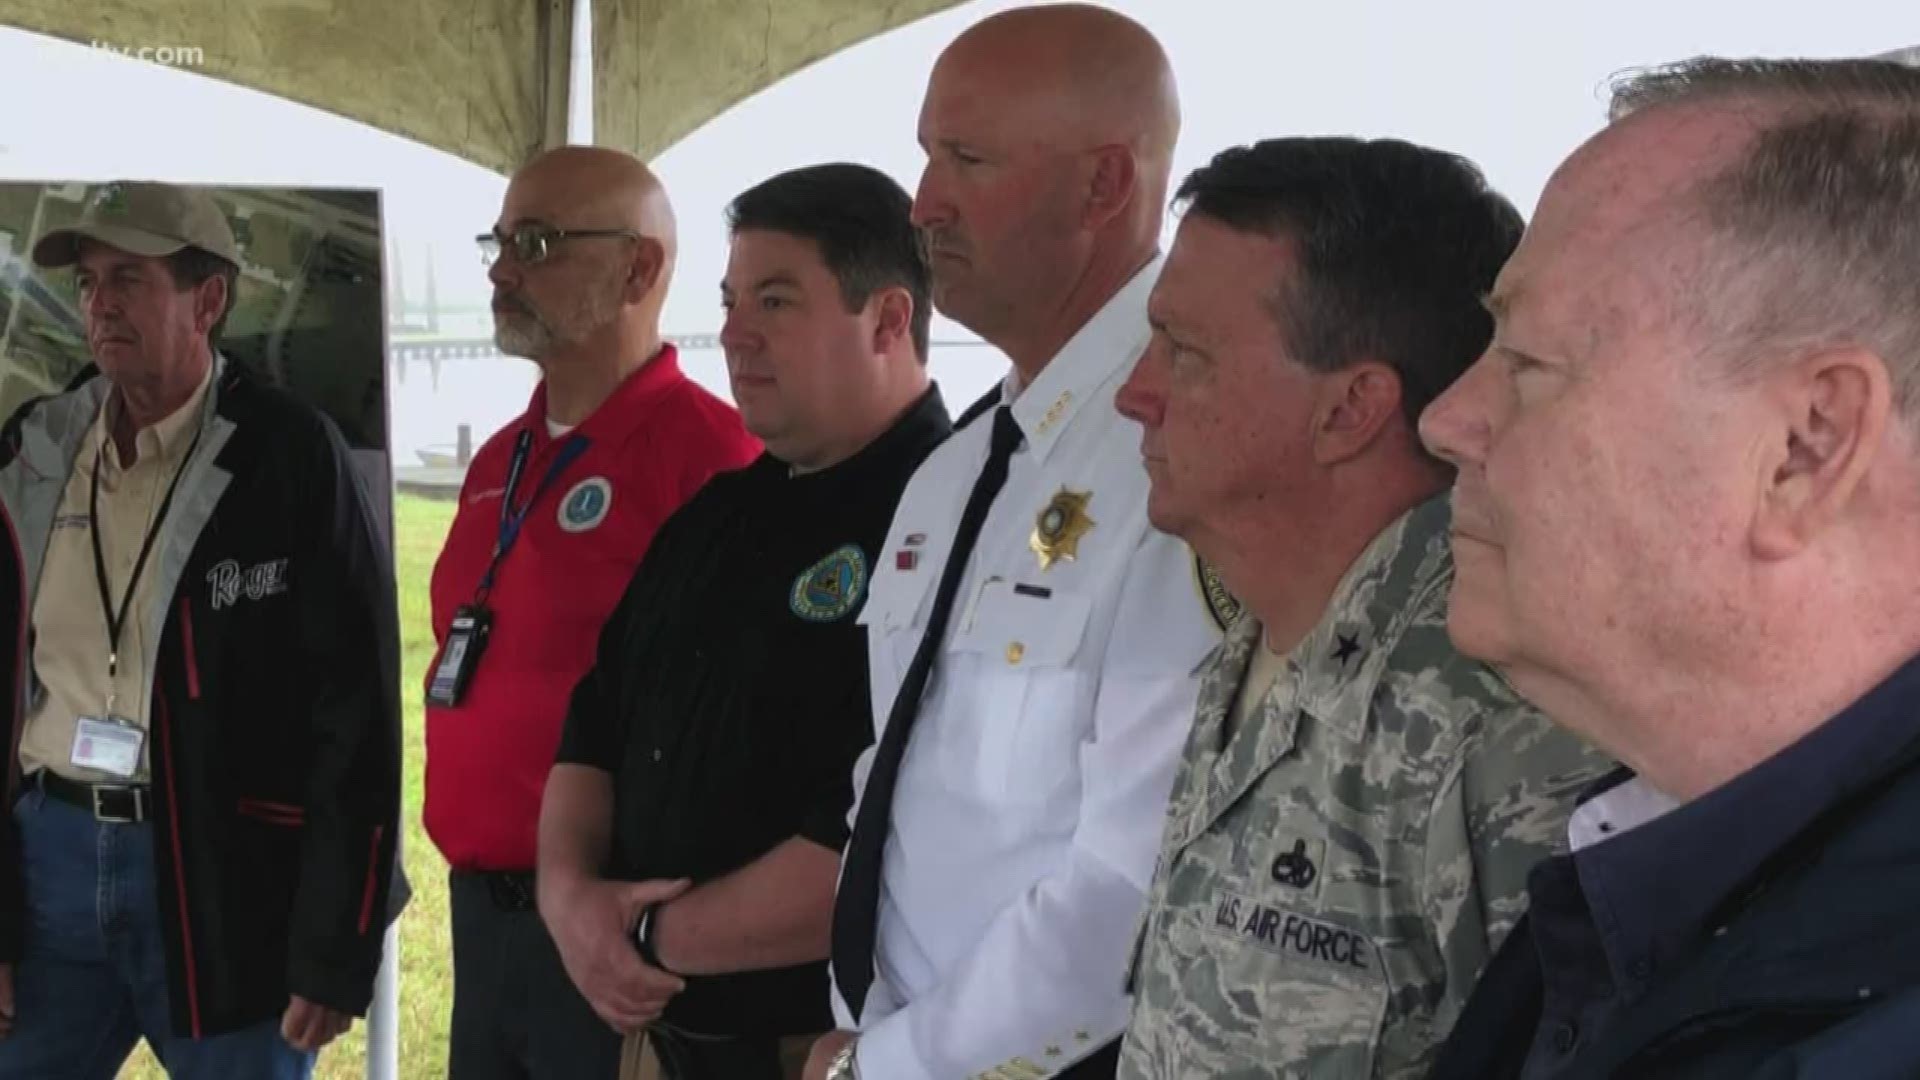 More than 150 responders gathered at the Myrtle Grove Marina in Plaquemines Parish for a multi-parish drill.